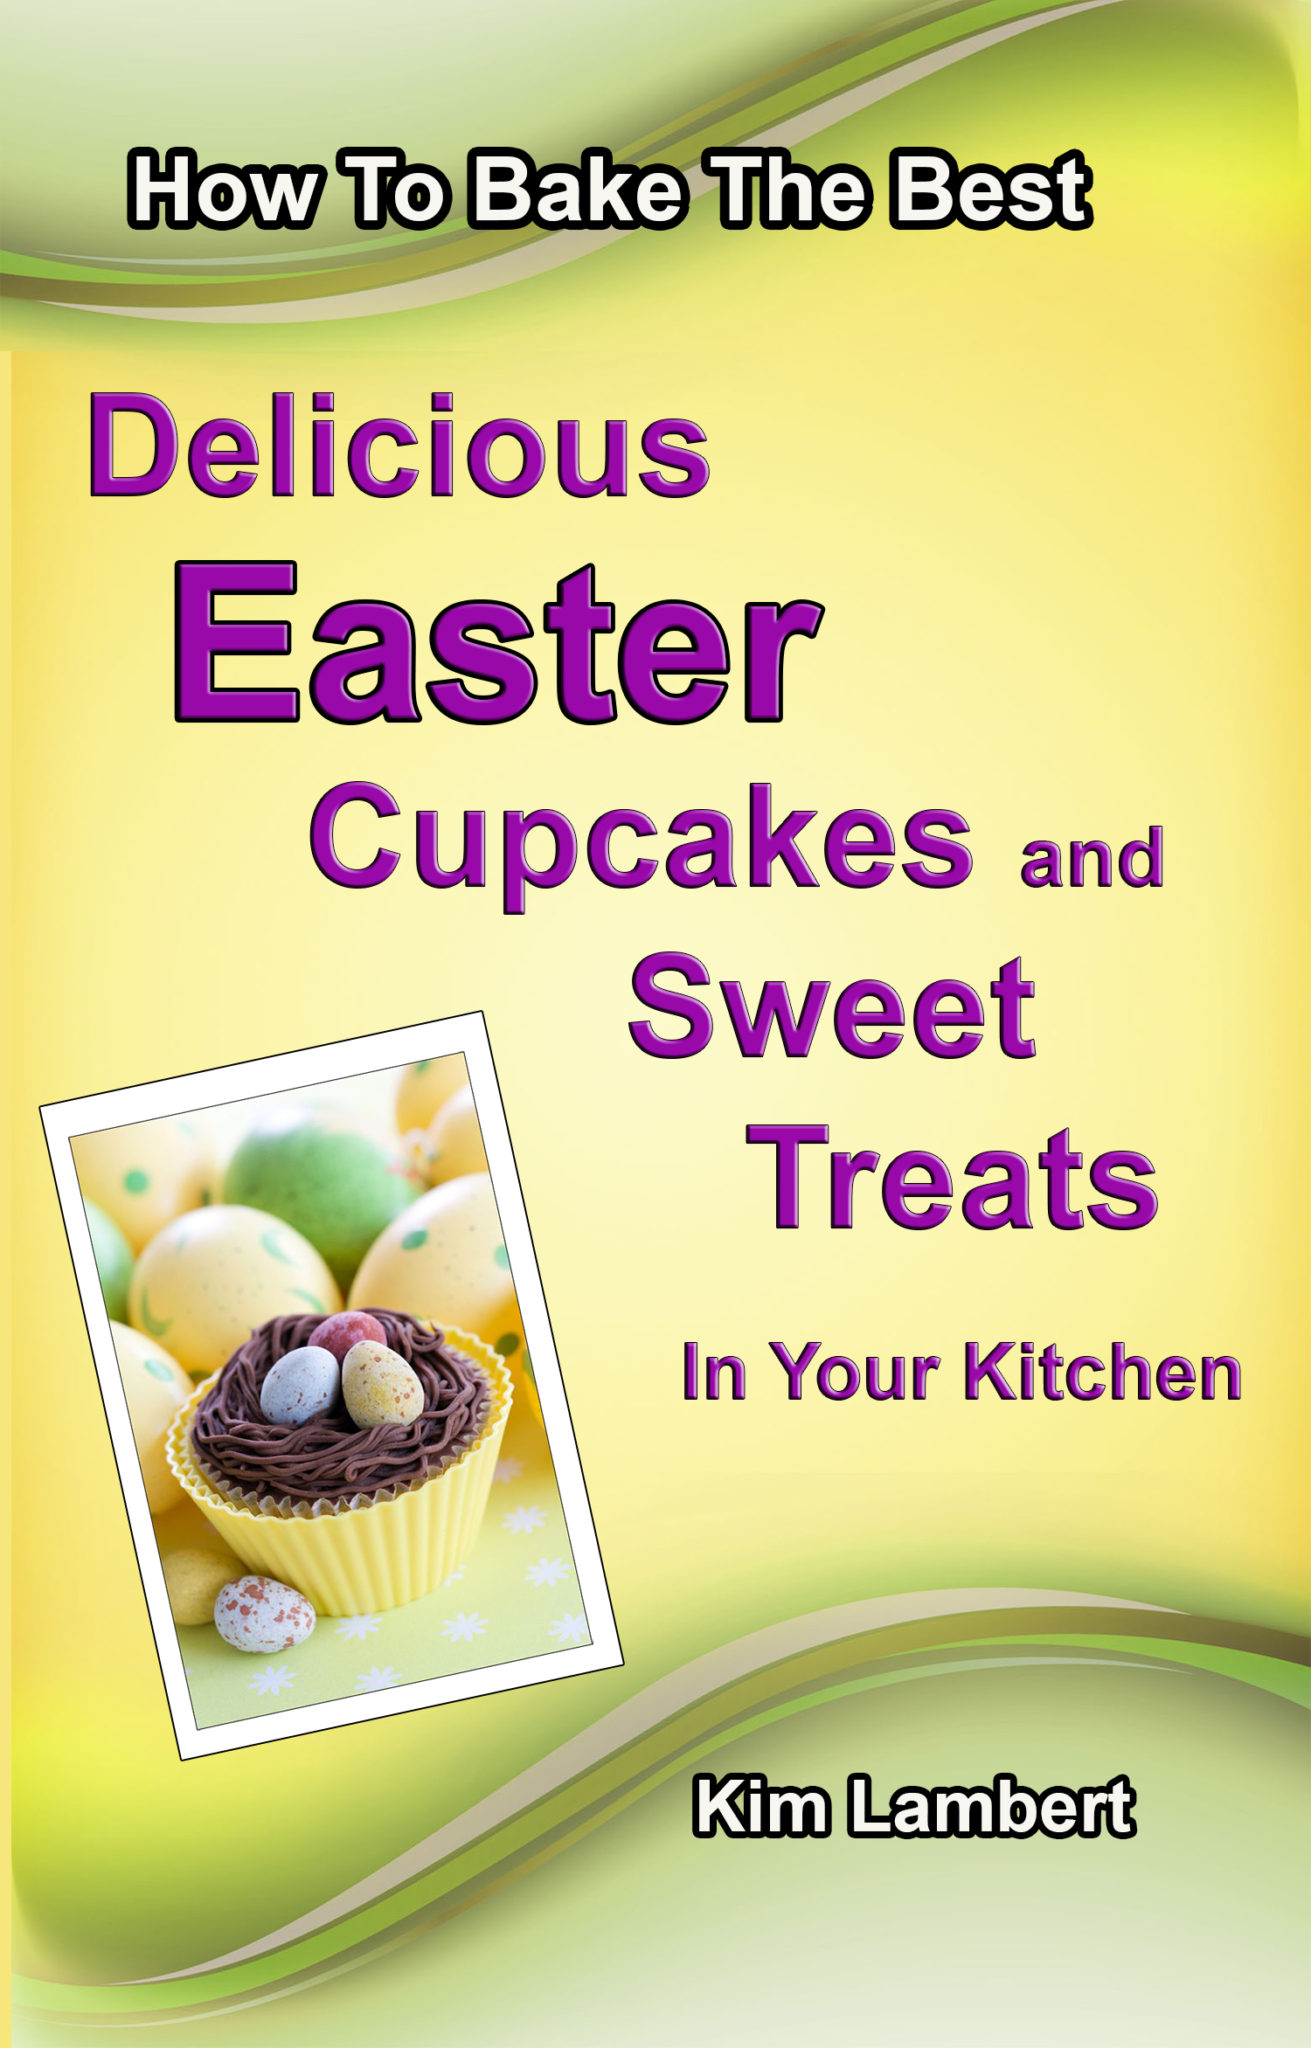 How to Bake the Best Delicious Easter Cupcakes and Sweet Treats – in Your Kitchen by Kim Lambert